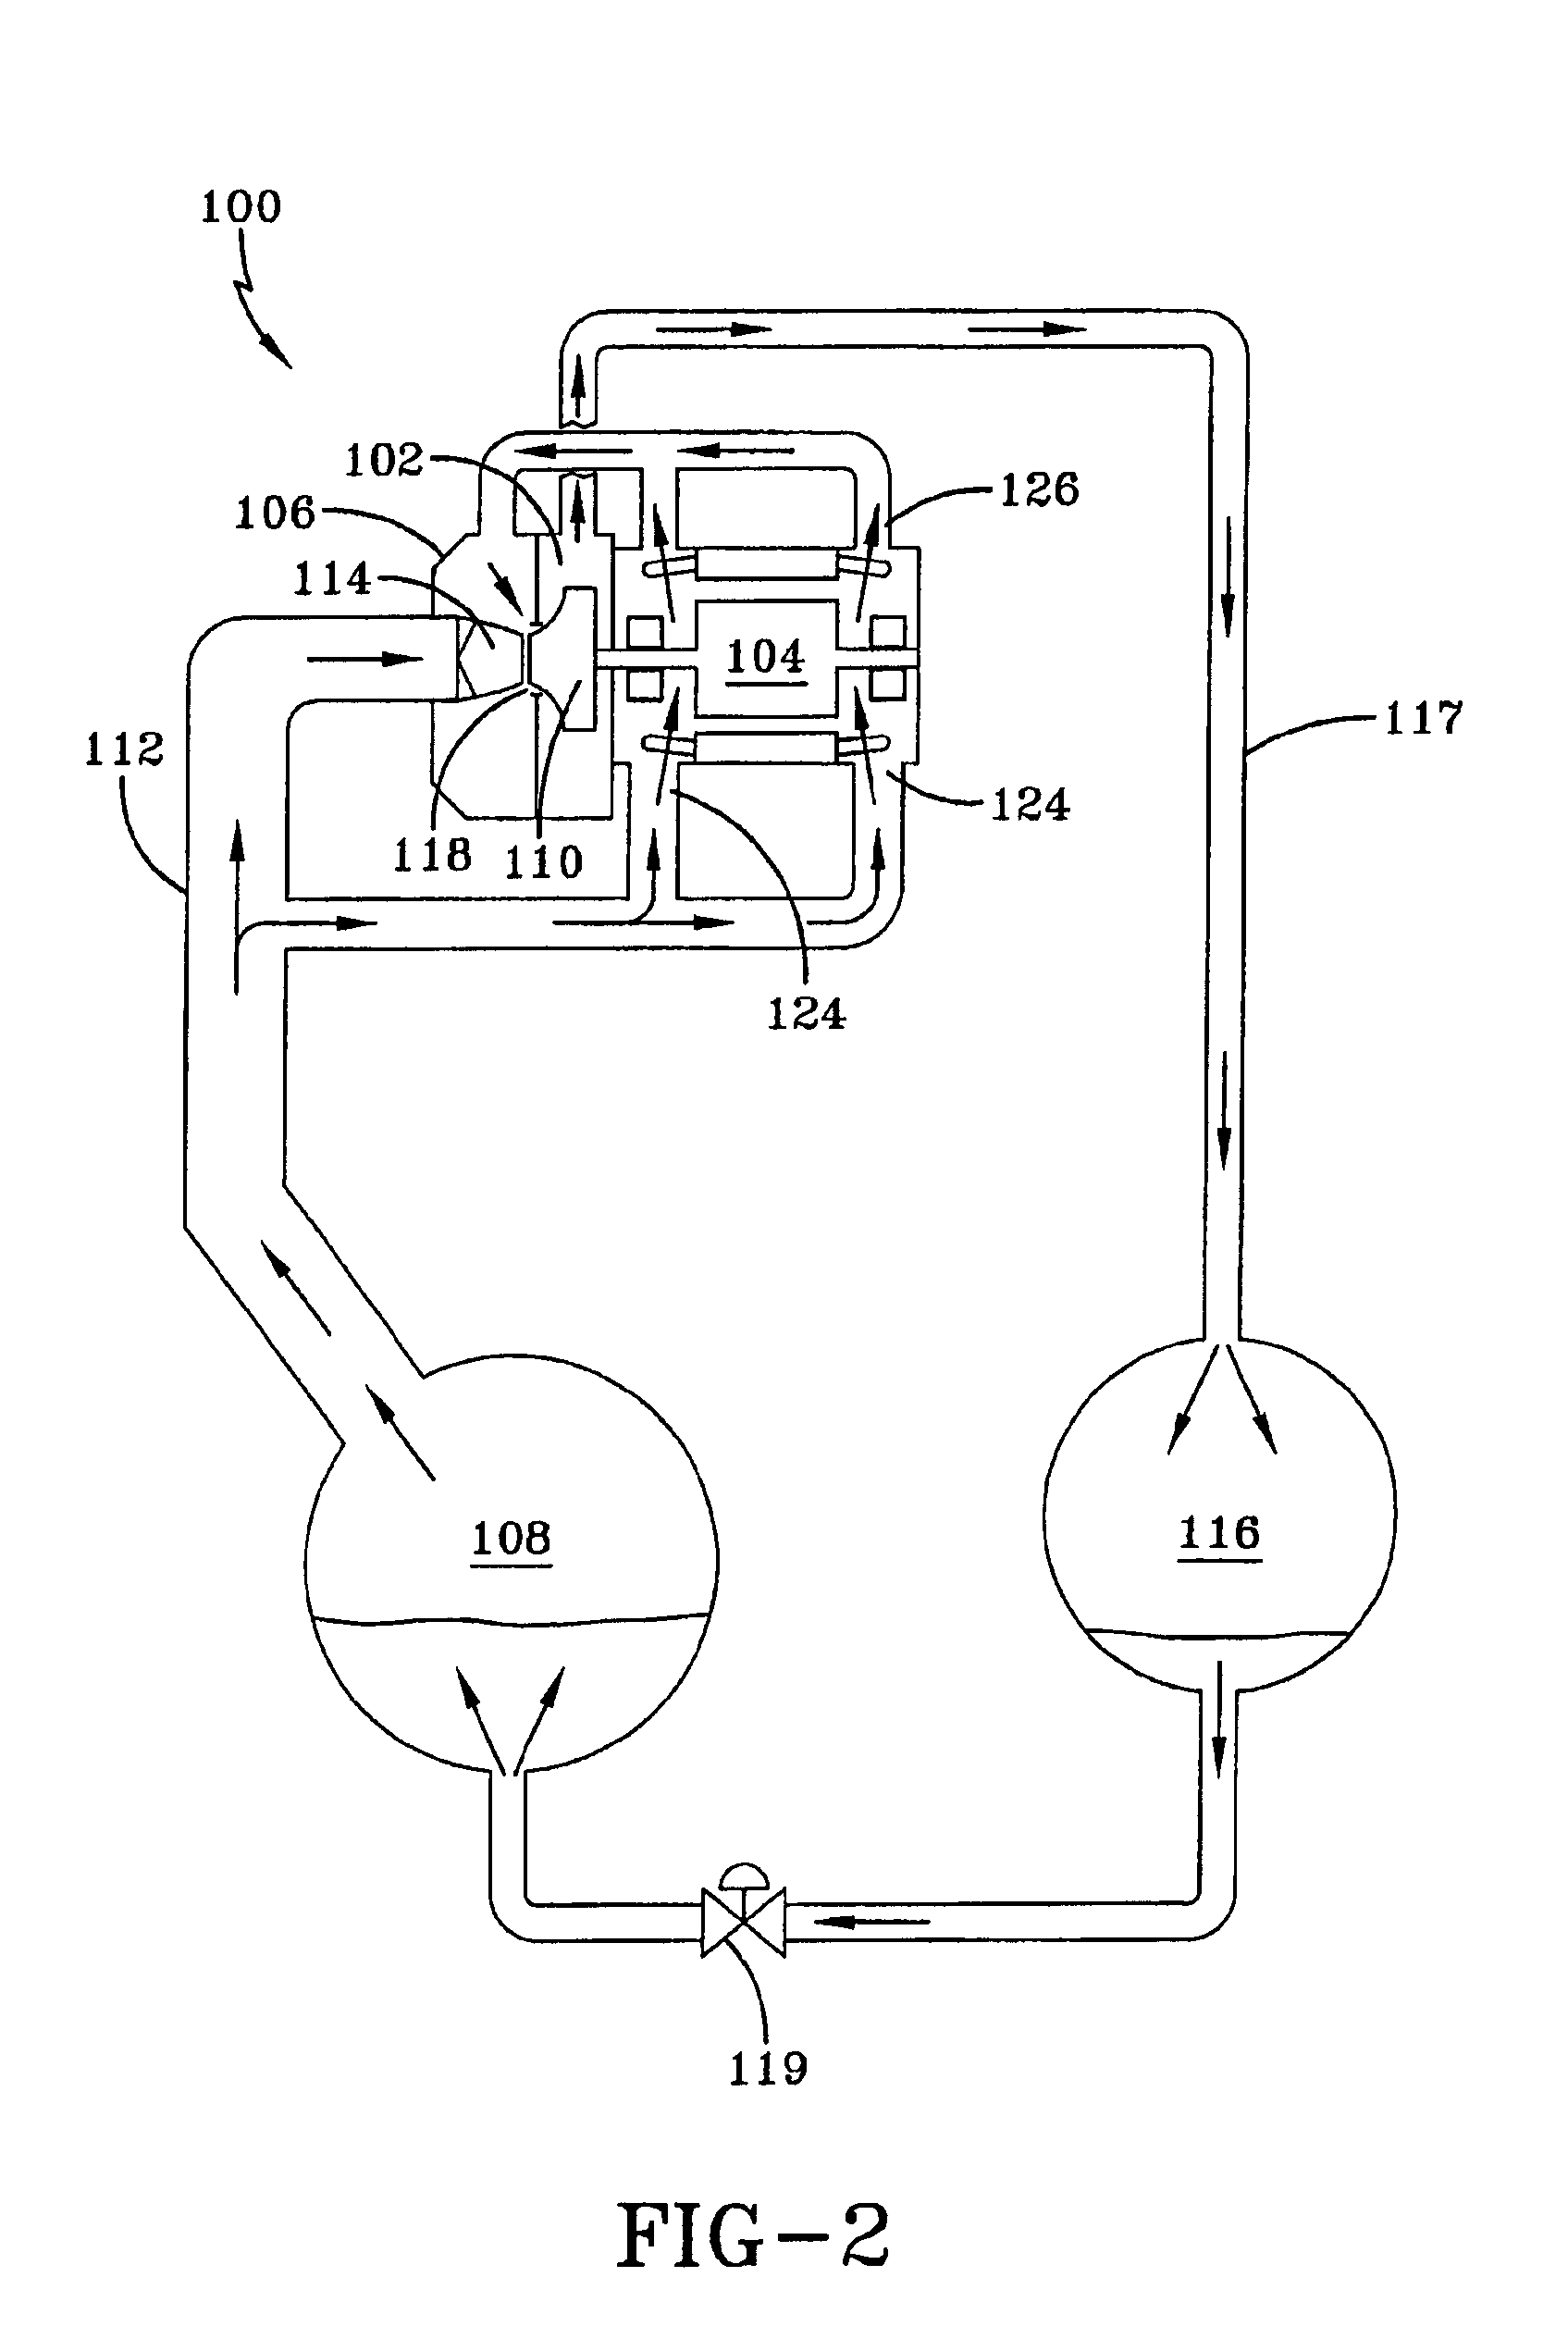 System and method for cooling a compressor motor